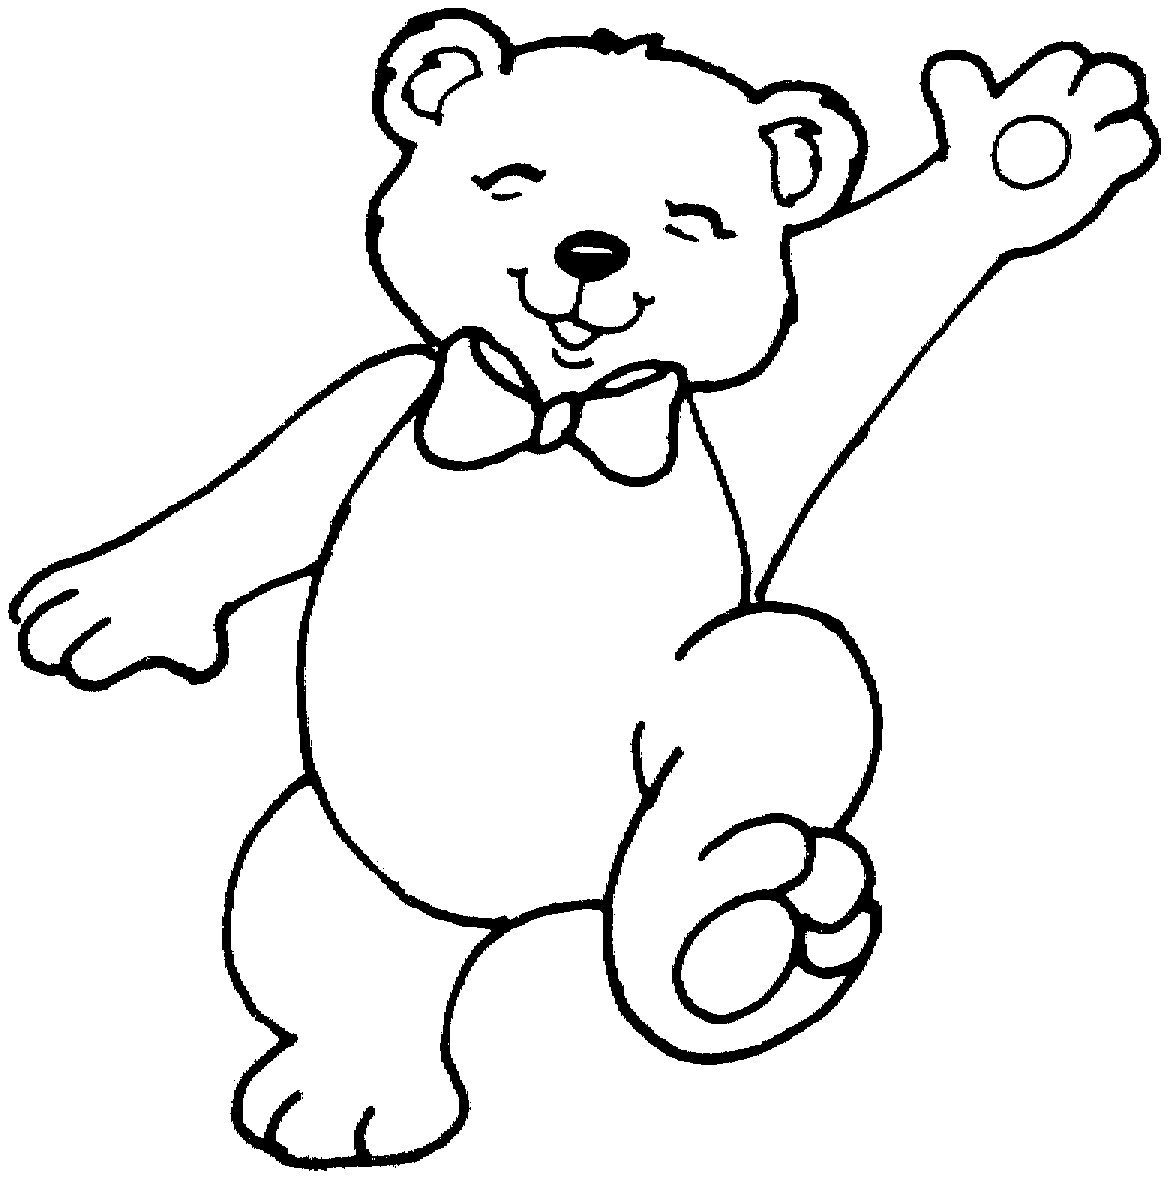 Bear Coloring Pages For Kids
 Free Bear Coloring Pages